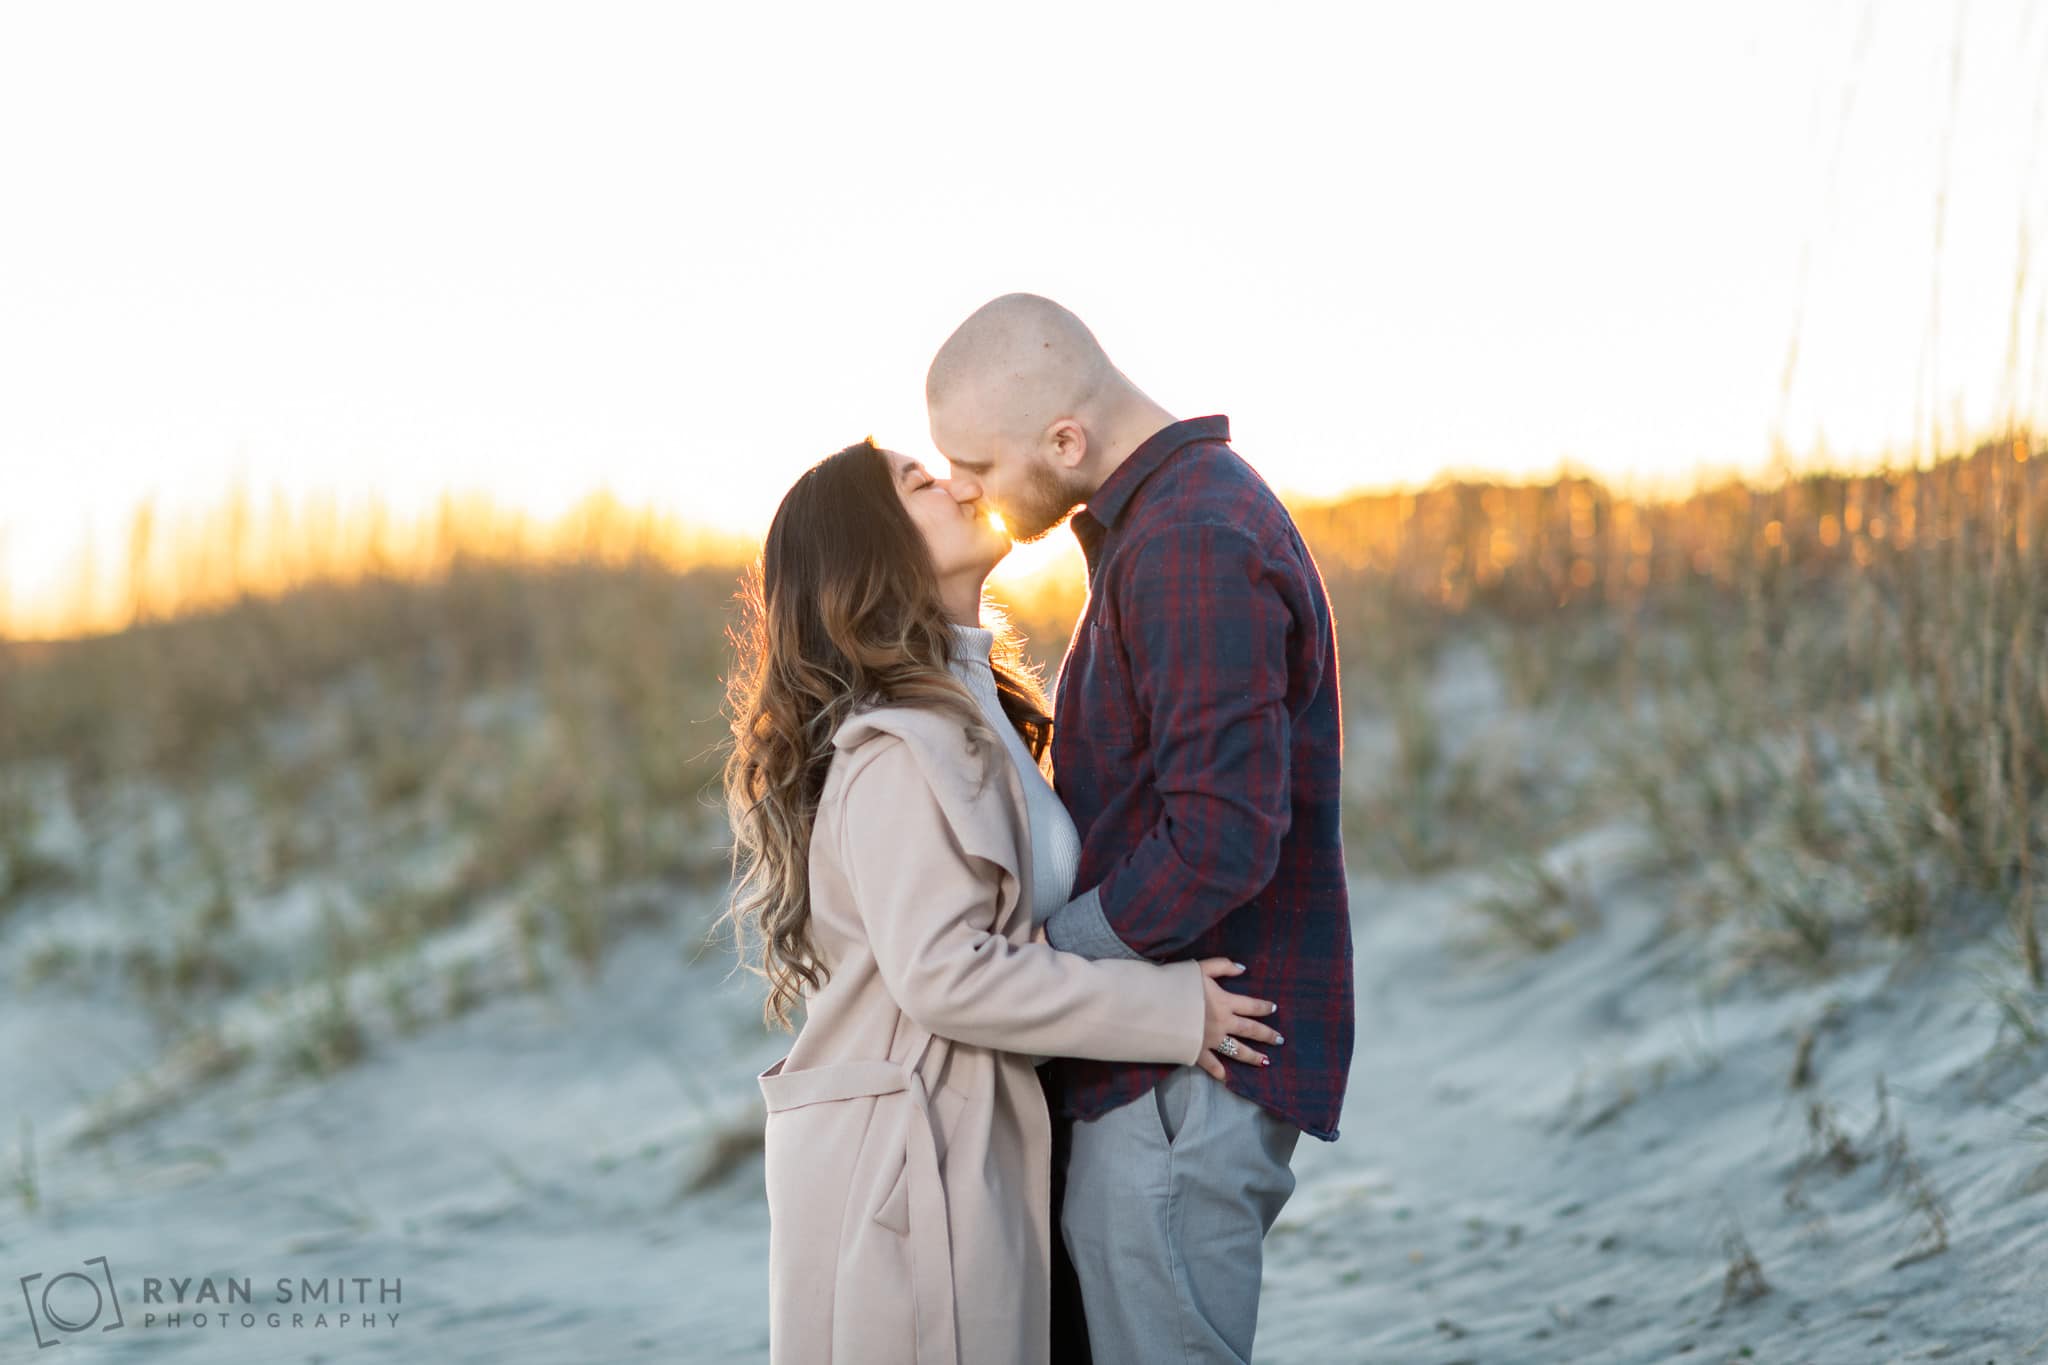 Kiss with the sunset right behind the couple - Huntington Beach State Park